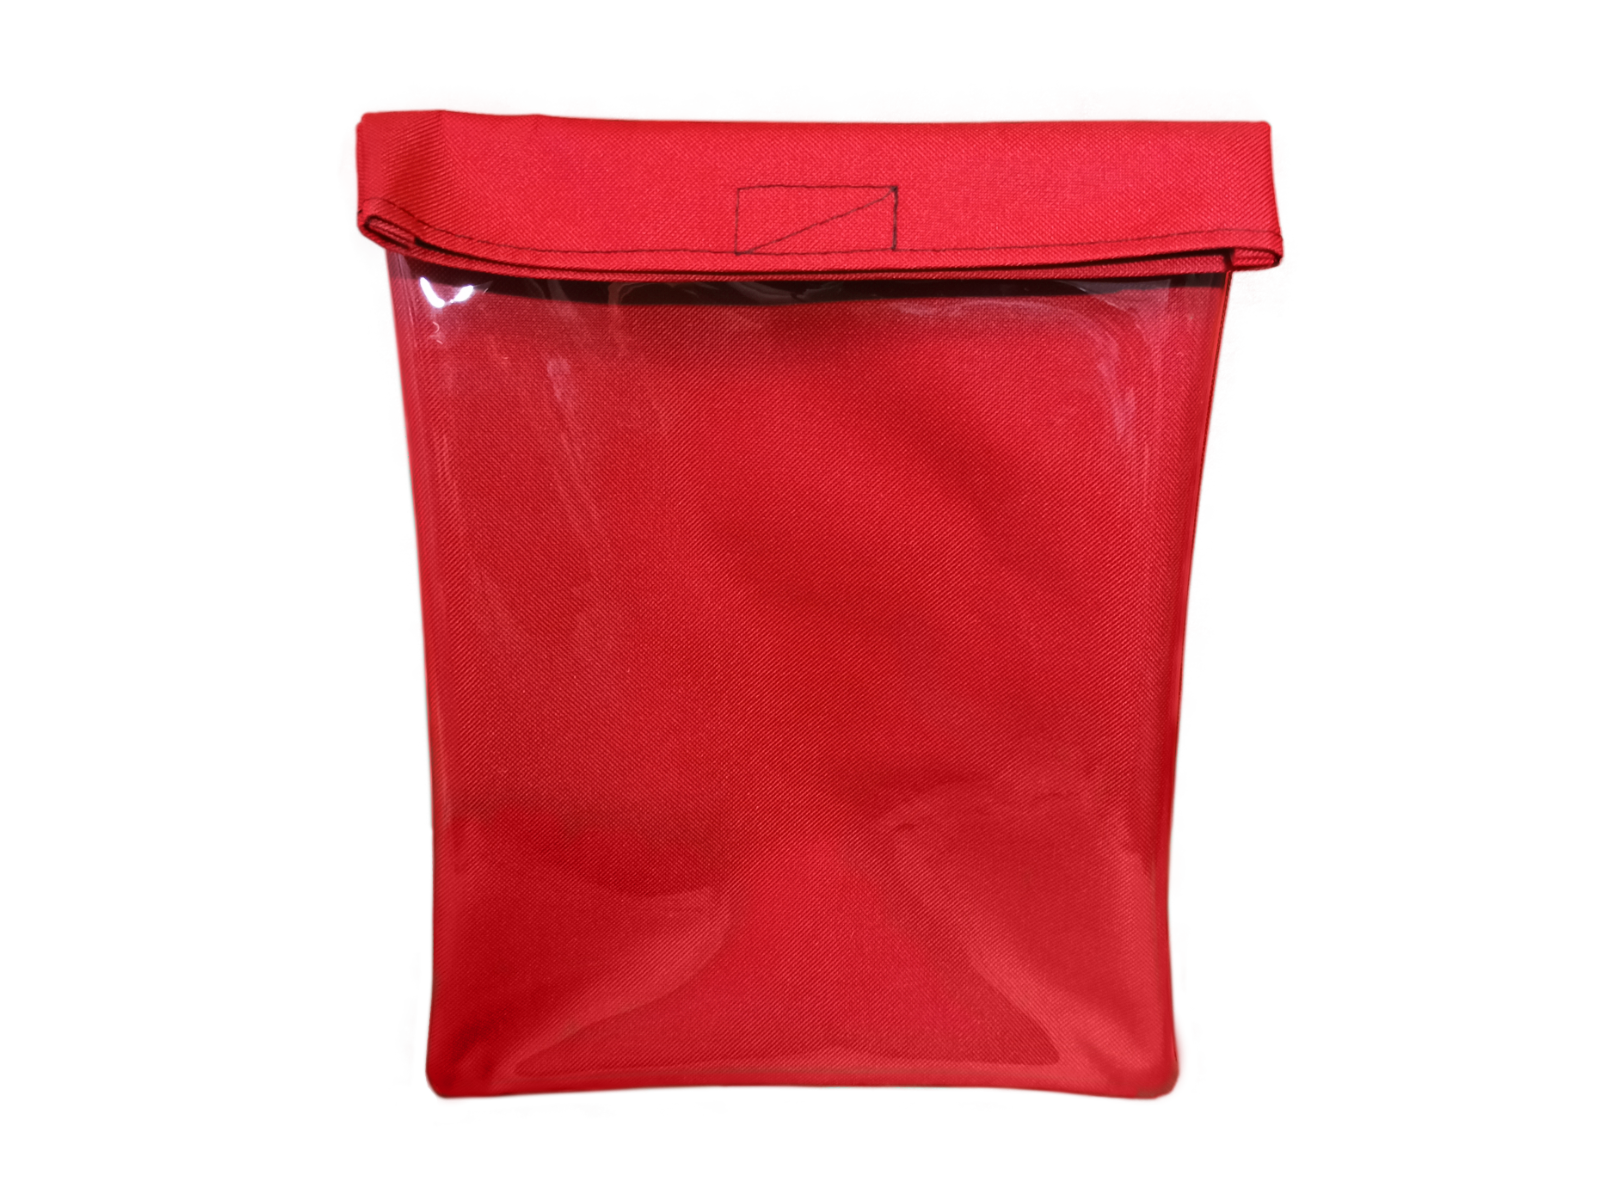 Kanga Pouch - School Bag & Document Holder - Order Yours Today!